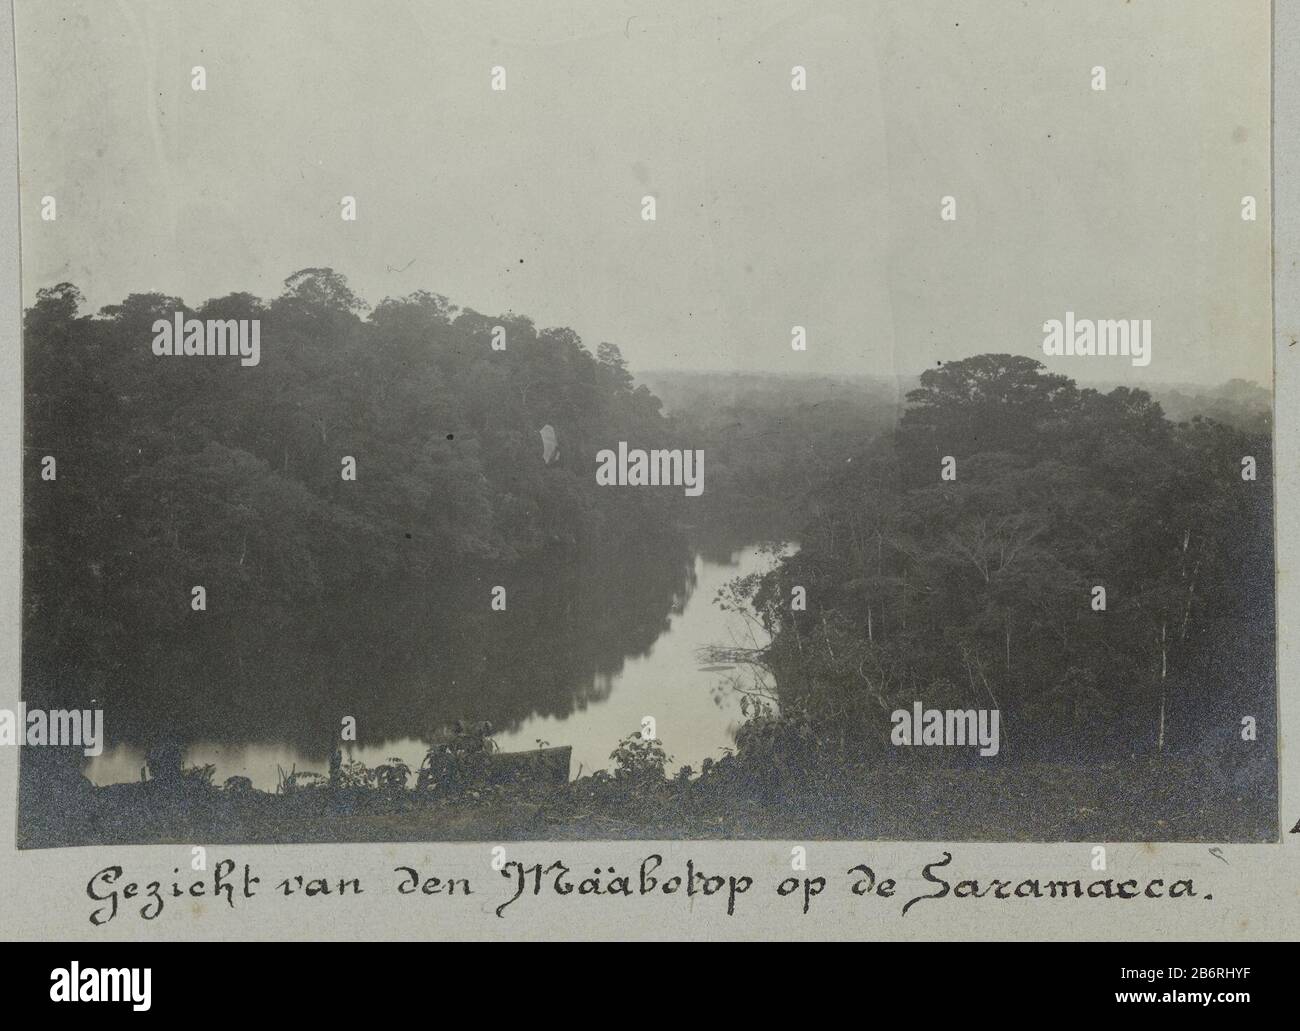 View from the top of the hill on the Maabo Saramaccariver. Part of the album Souvenir de Voyage (Part 1), about the life of the Doijer family in and around the plantation Ma Retraite in Suriname during the years 1906-1913. Manufacturer : Photographer: Hendrik Doijer (attributed to) Place manufacture: Suriname Date: 1906 - 1913 Physical features: gelatin silver print material: paper Technique: gelatin silver print dimensions: photo: h 80 mm × W 112 mm Date: 1906 - 1913 Stock Photo